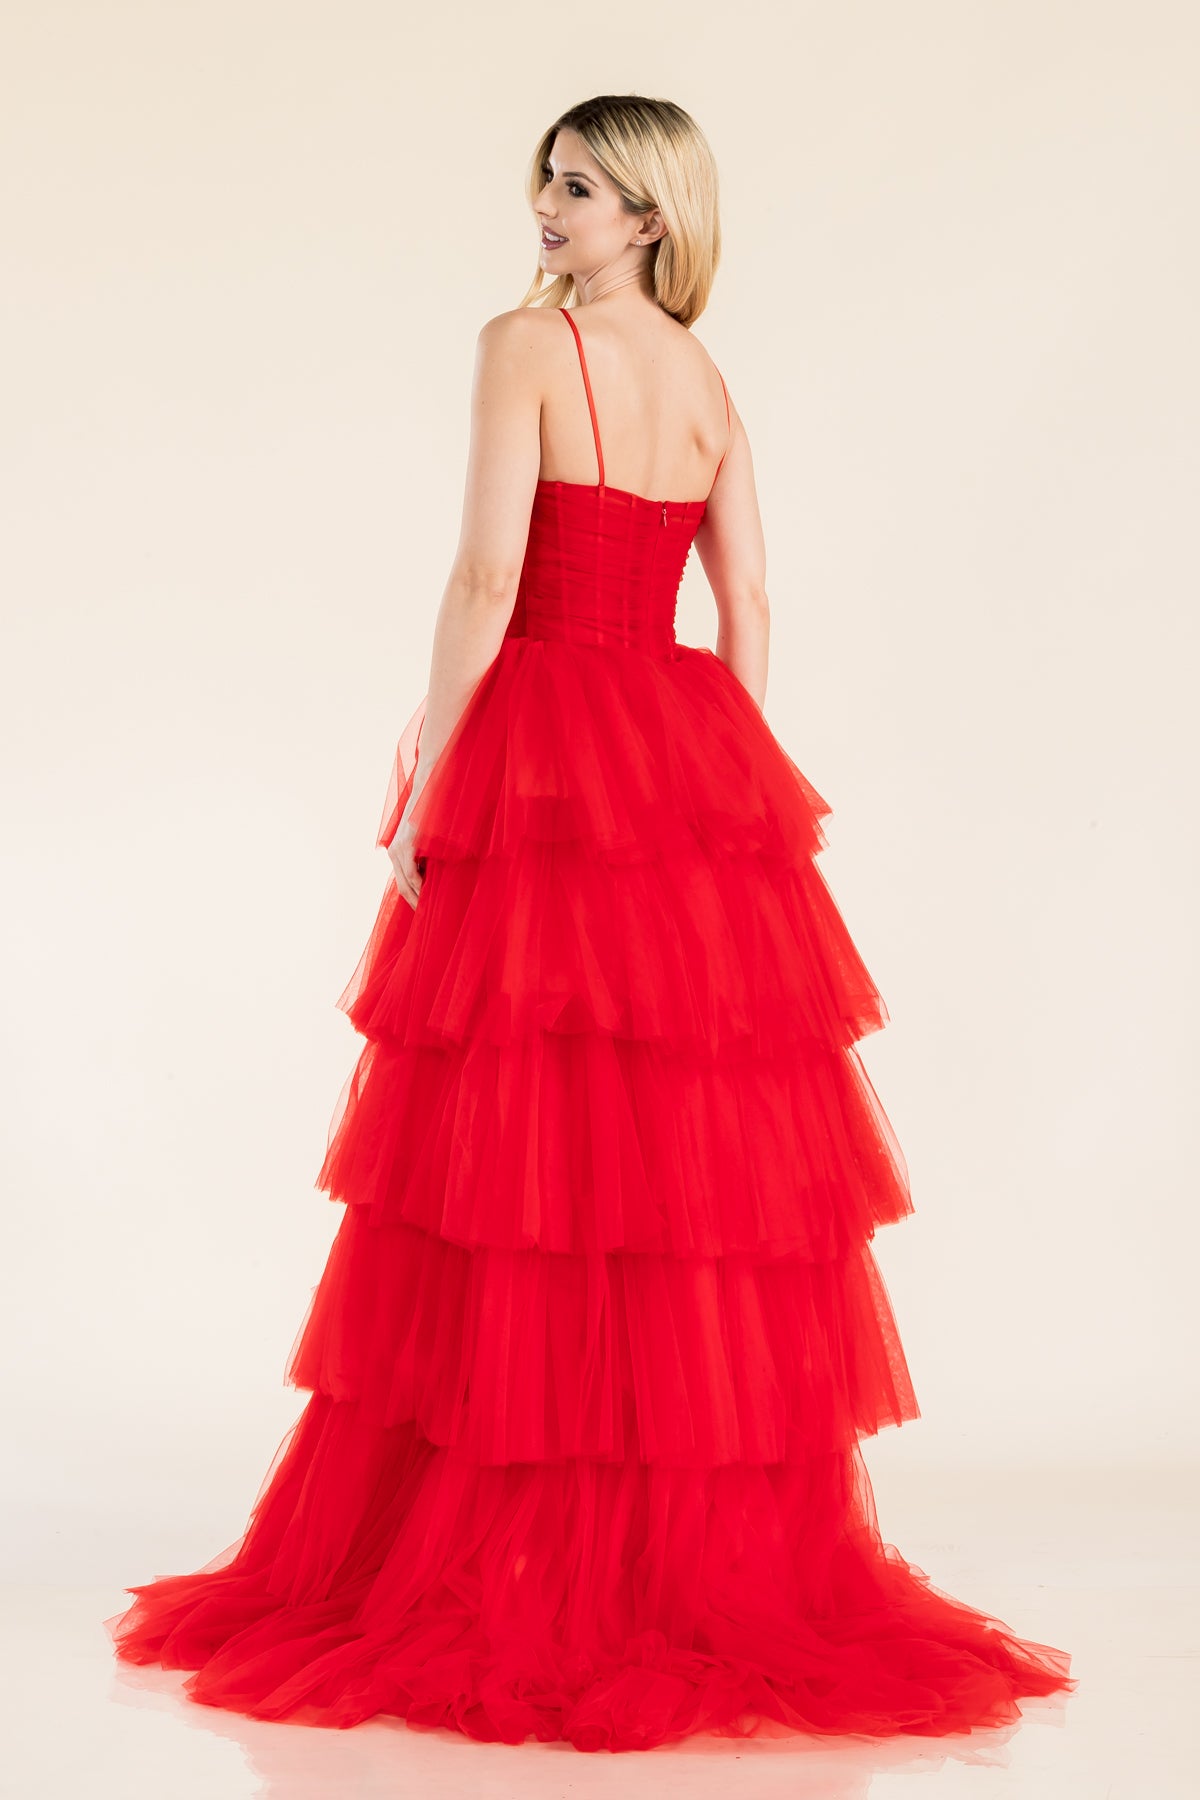 Prima Dress -SA502415 Halter Layered Tulle Ball Gown